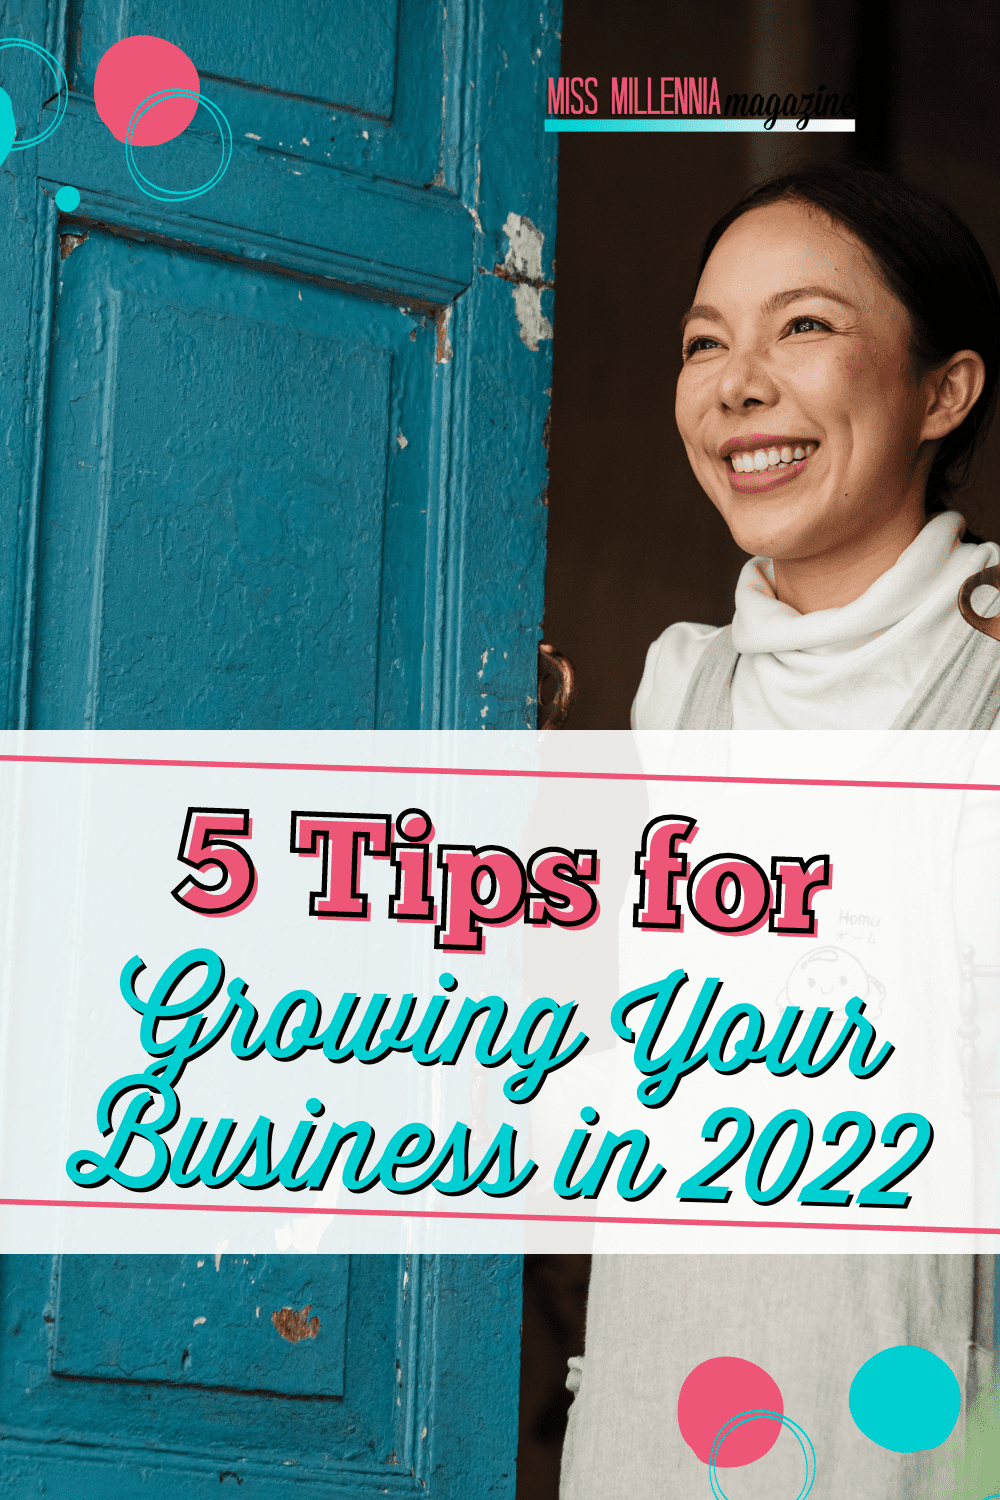 5 Tips for Growing Your Business in 2022